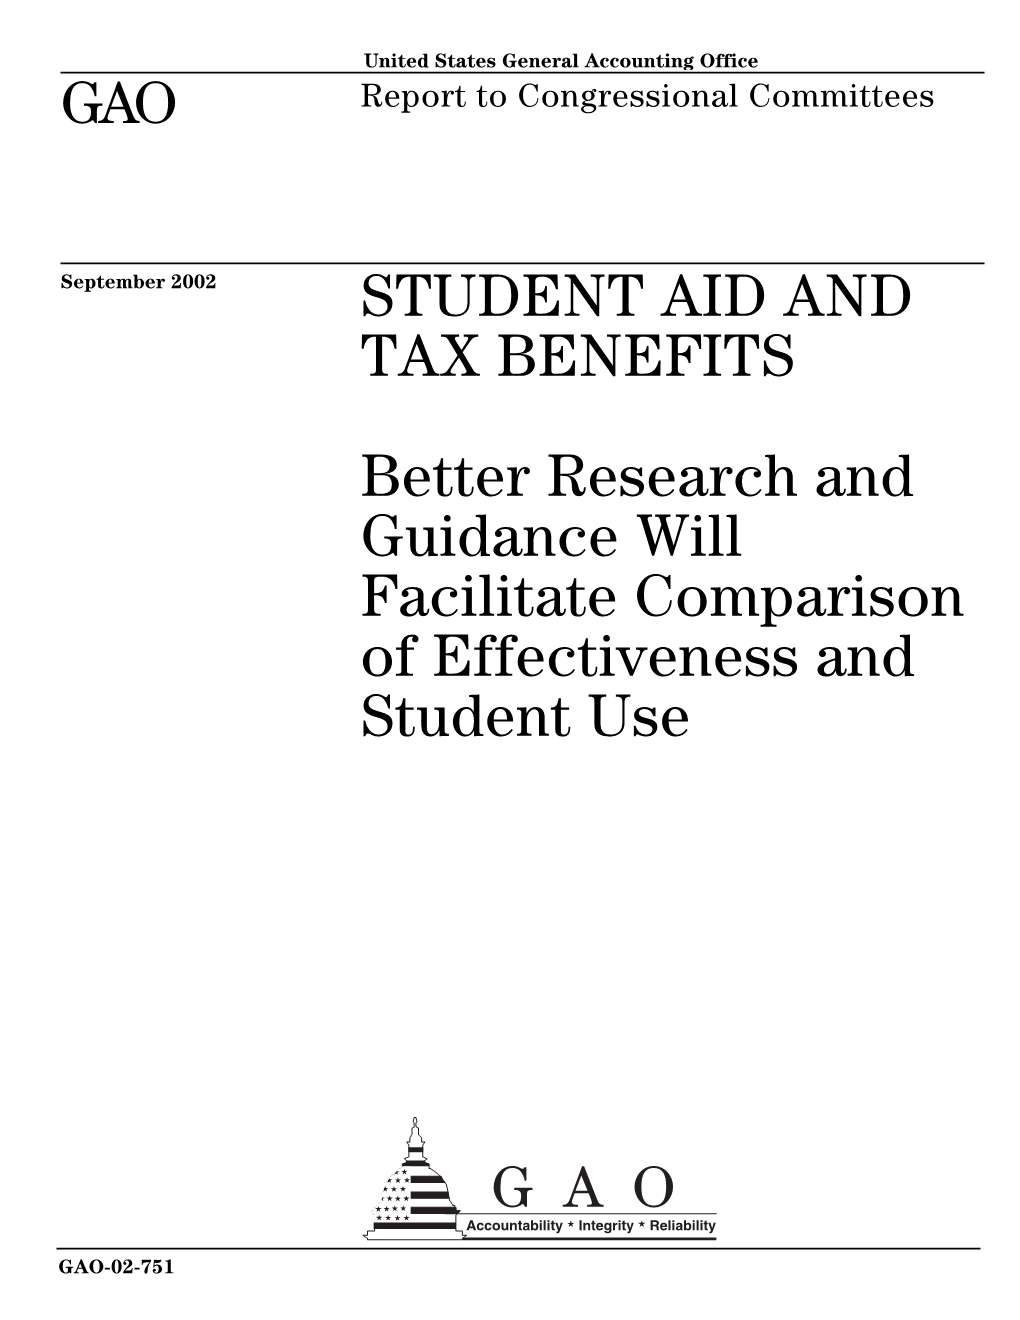 GAO-02-751 Student Aid and Tax Benefits